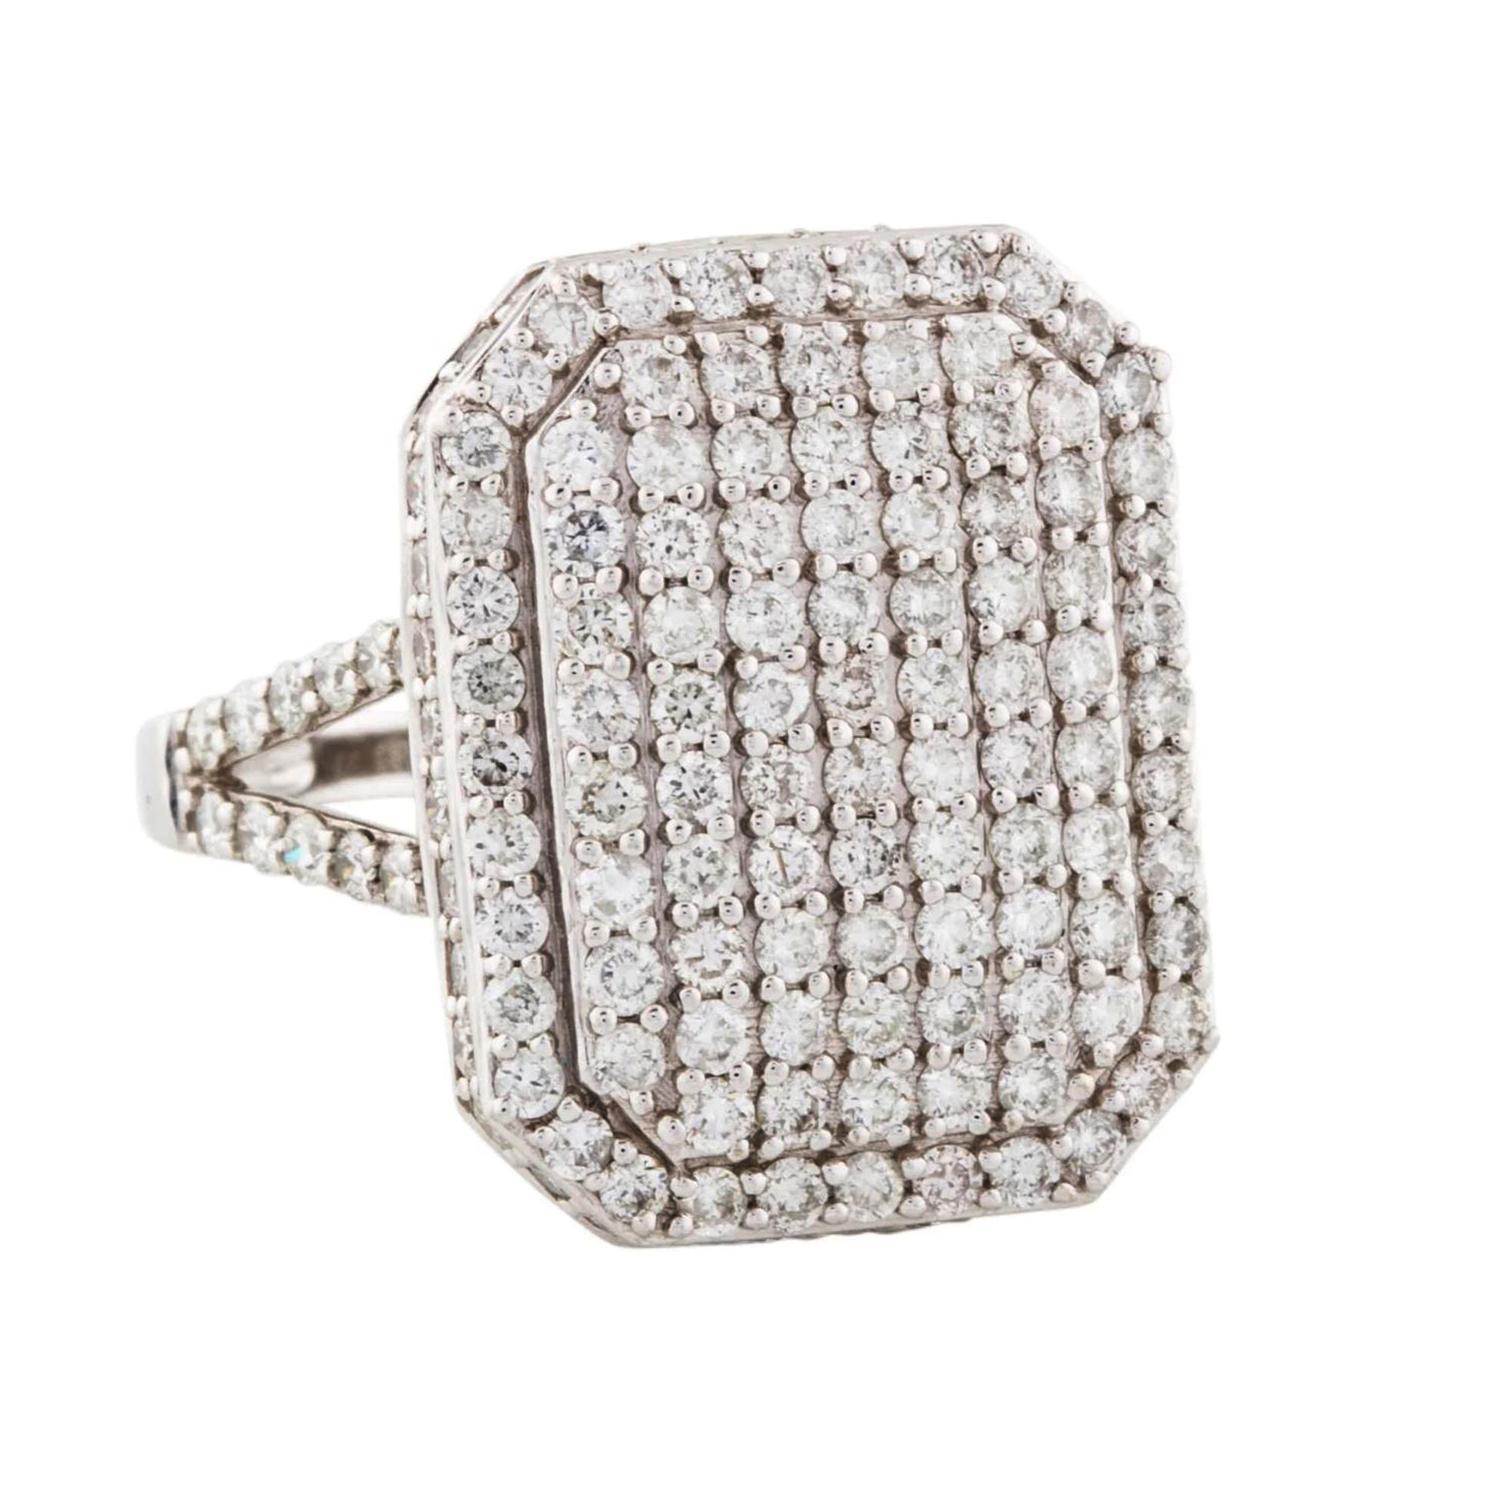 Mixed Cut Octogen Shape Signet Pave Diamonds Ring In 18k White Gold For Sale